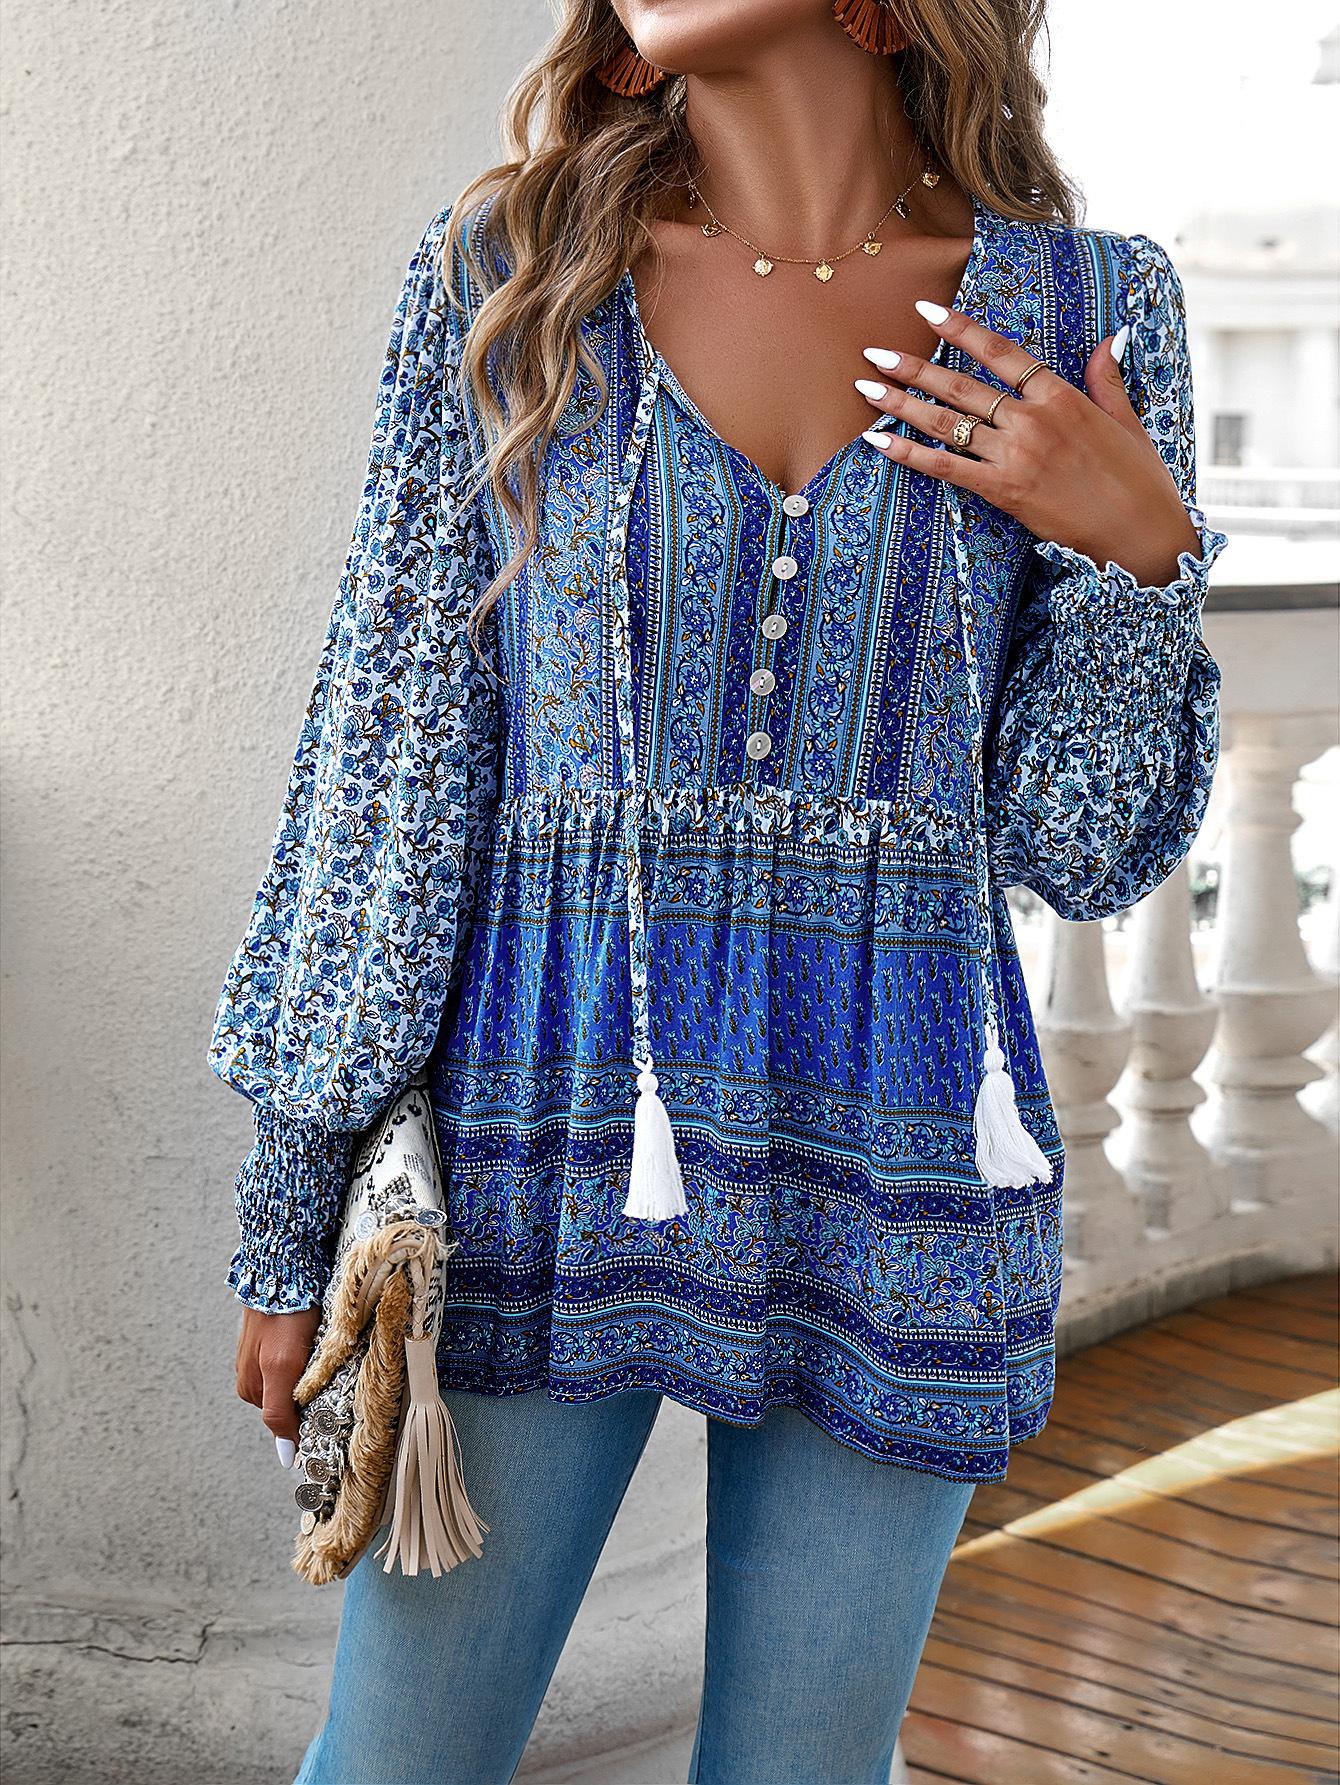 Women's Printed Casual Long Sleeve Blouse